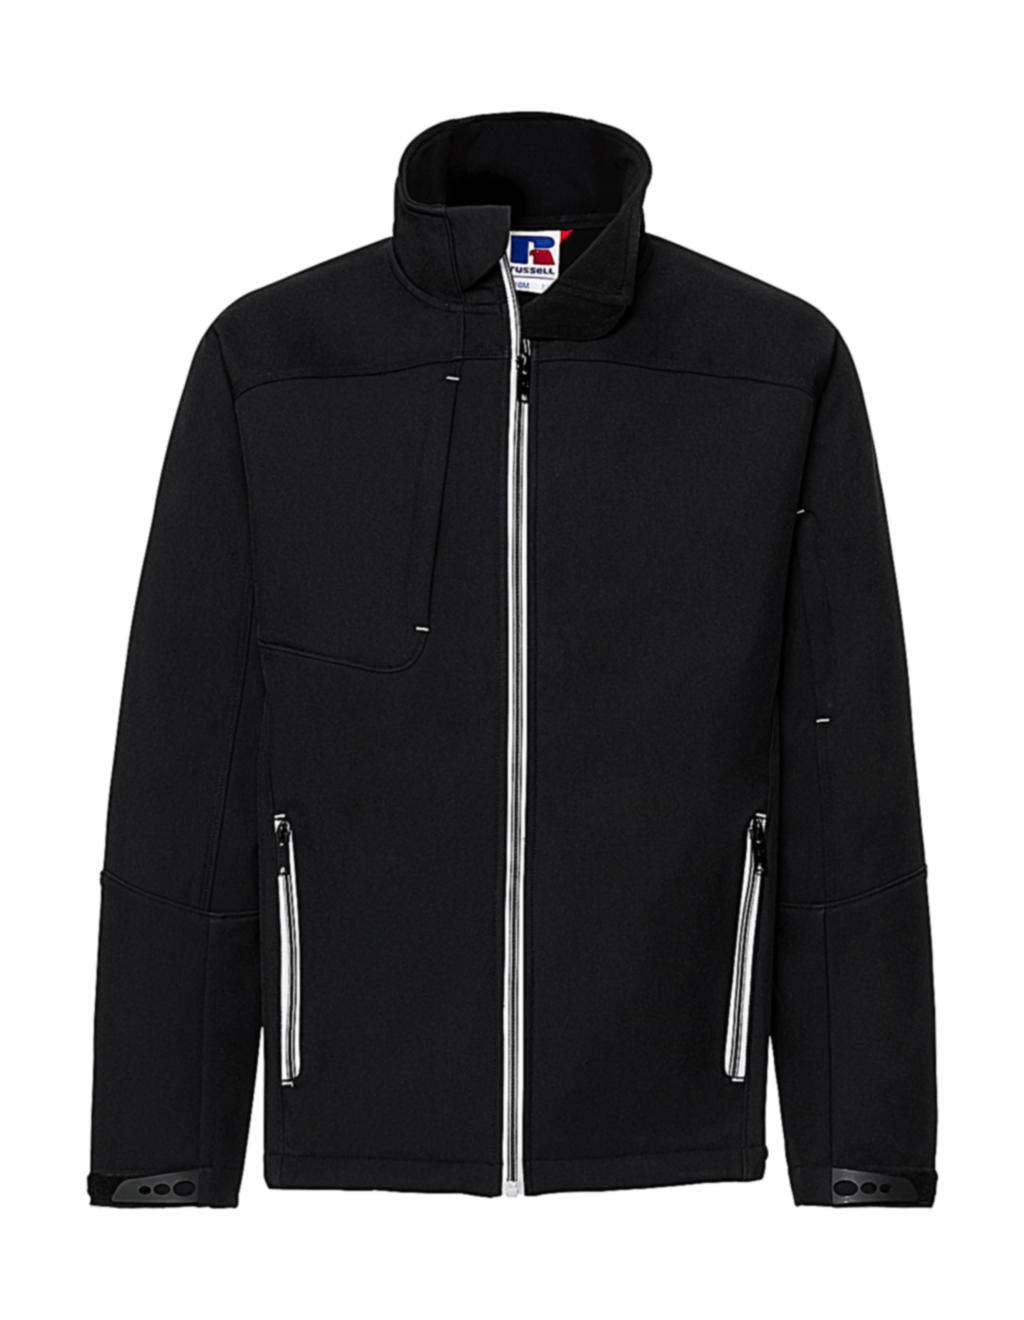 Russell europe - softshell hombre bionic - 417